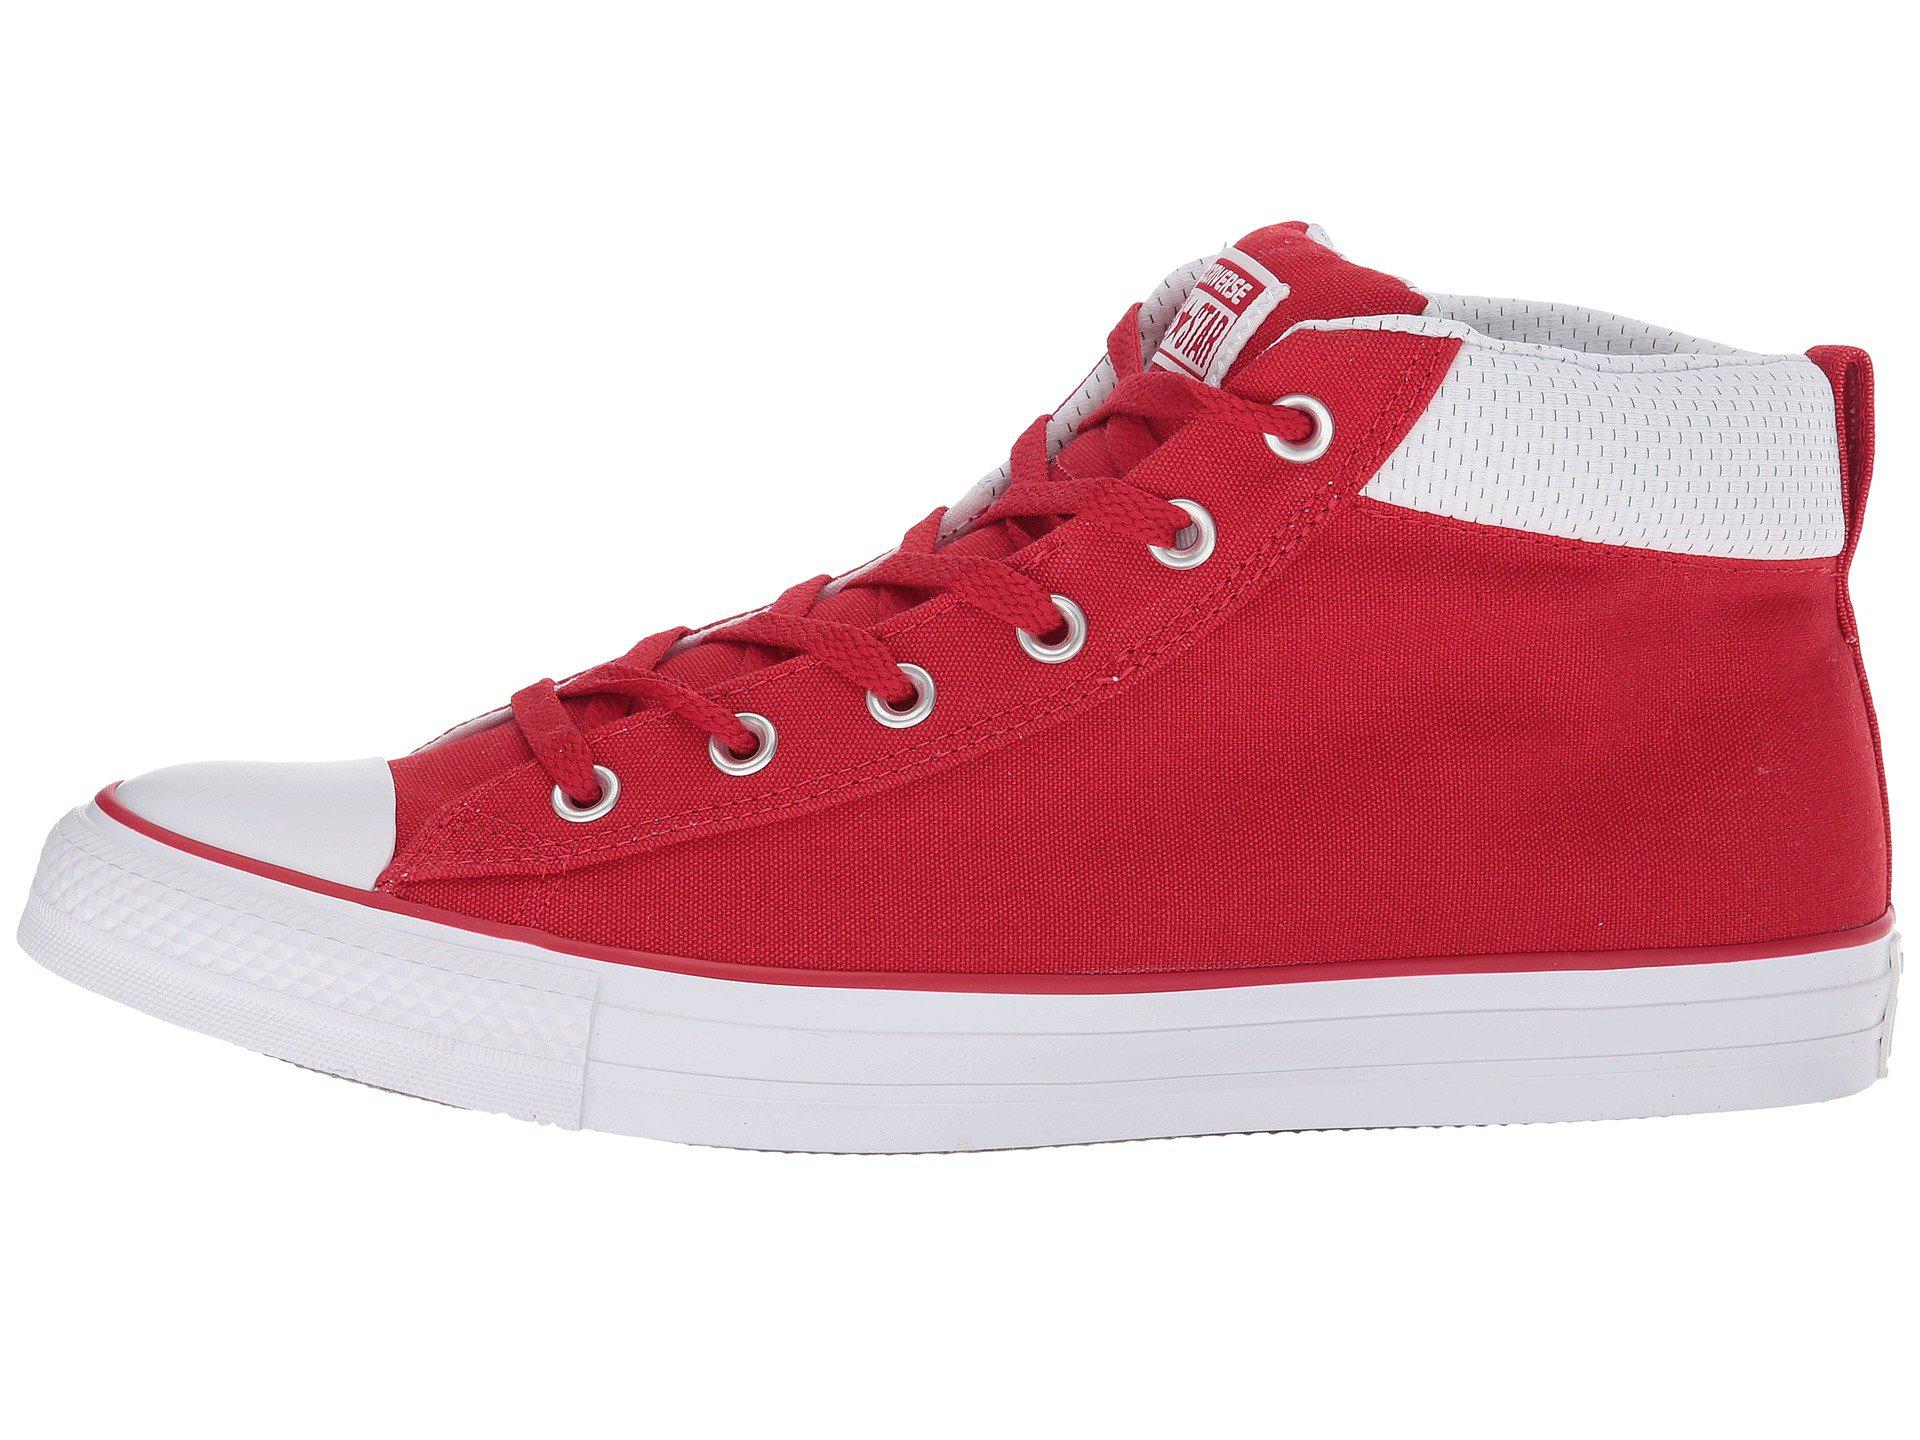 Converse Leather Chuck Taylor® All Star® Street Mid in Red for Men - Lyst